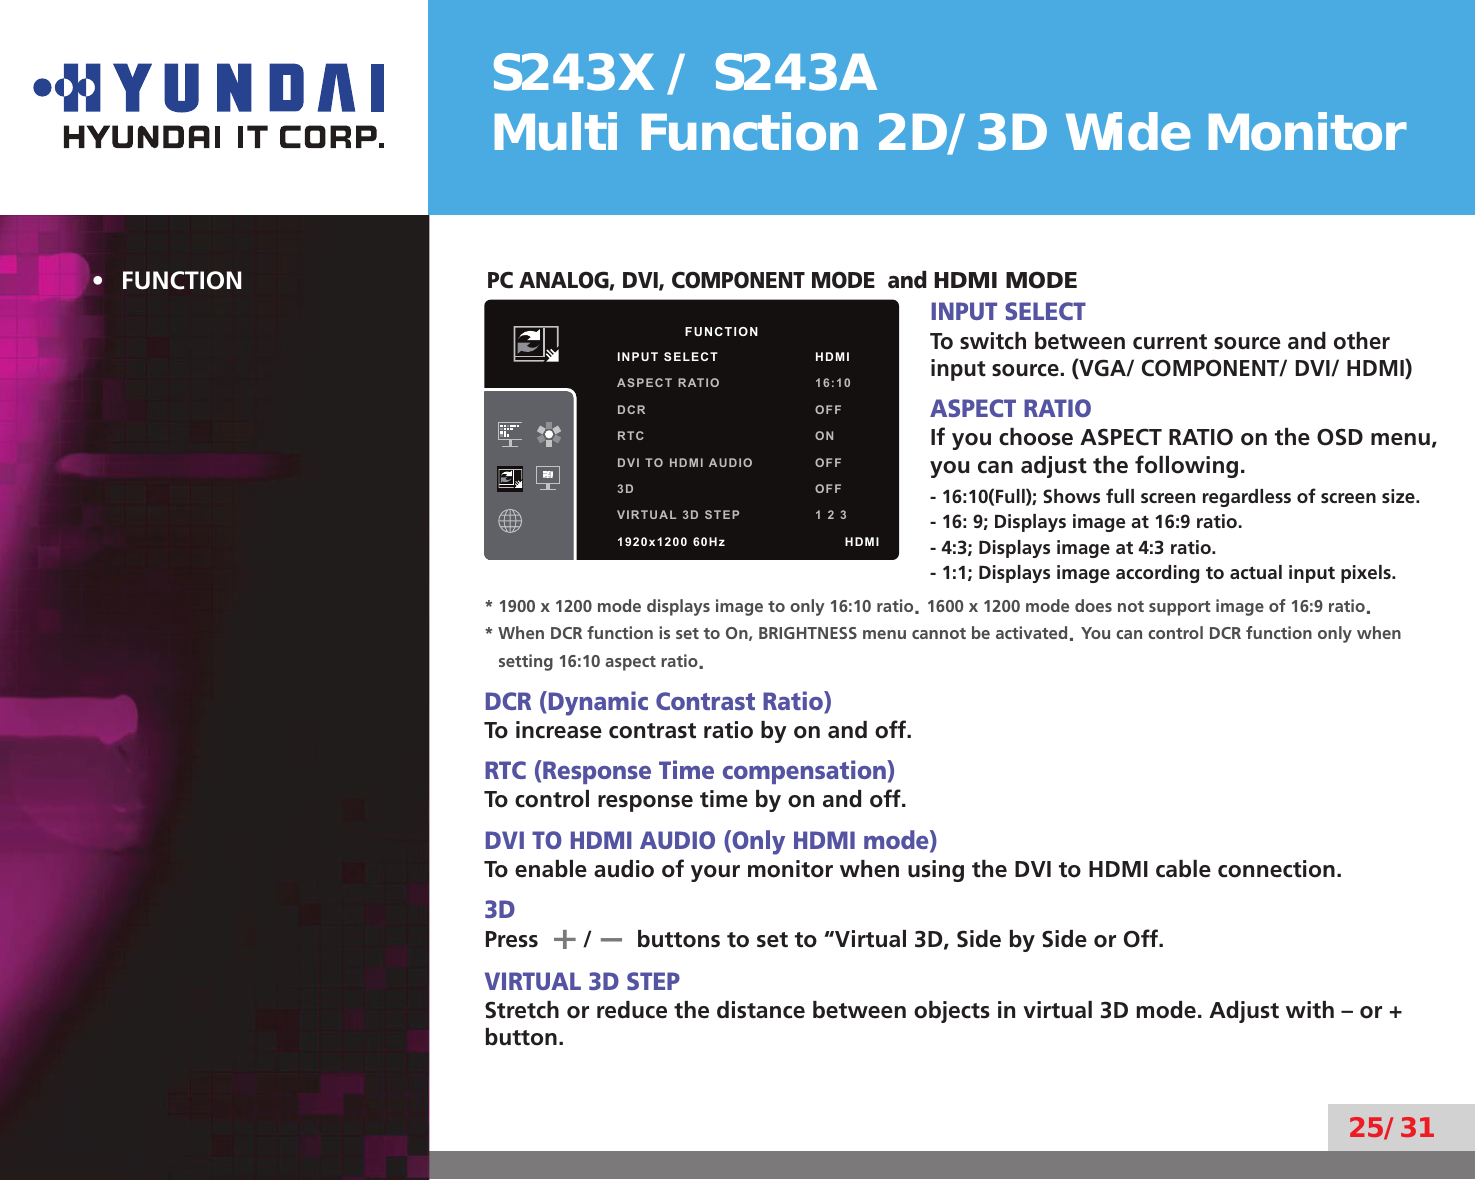 S243X / S243AMulti Function 2D/3D Wide Monitor25/31FUNCTION• PC ANALOG, DVI, COMPONENT MODE  and HDMI MODEINPUT SELECTTo switch between current source and other input source. (VGA/ COMPONENT/ DVI/ HDMI)ASPECT RATIOIf you choose ASPECT RATIO on the OSD menu, you can adjust the following.- 16:10(Full); Shows full screen regardless of screen size.- 16: 9; Displays image at 16:9 ratio.- 4:3; Displays image at 4:3 ratio. - 1:1; Displays image according to actual input pixels.* 1900 x 1200 mode displays image to only 16:10 ratio. 1600 x 1200 mode does not support image of 16:9 ratio.*  When DCR function is set to On, BRIGHTNESS menu cannot be activated. You can control DCR function only when setting 16:10 aspect ratio.DCR (Dynamic Contrast Ratio)To increase contrast ratio by on and off.RTC (Response Time compensation)To control response time by on and off.DVI TO HDMI AUDIO (Only HDMI mode)To enable audio of your monitor when using the DVI to HDMI cable connection.3DPress       /       buttons to set to “Virtual 3D, Side by Side or Off.VIRTUAL 3D STEPStretch or reduce the distance between objects in virtual 3D mode. Adjust with – or + button.        FUNCTIONINPUT SELECT HDMIASPECT RATIO 16:10DCR OFFRTC ONDVI TO HDMI AUDIO OFF3D OFFVIRTUAL 3D STEP 1 2 31920x1200 60Hz              HDMI–+